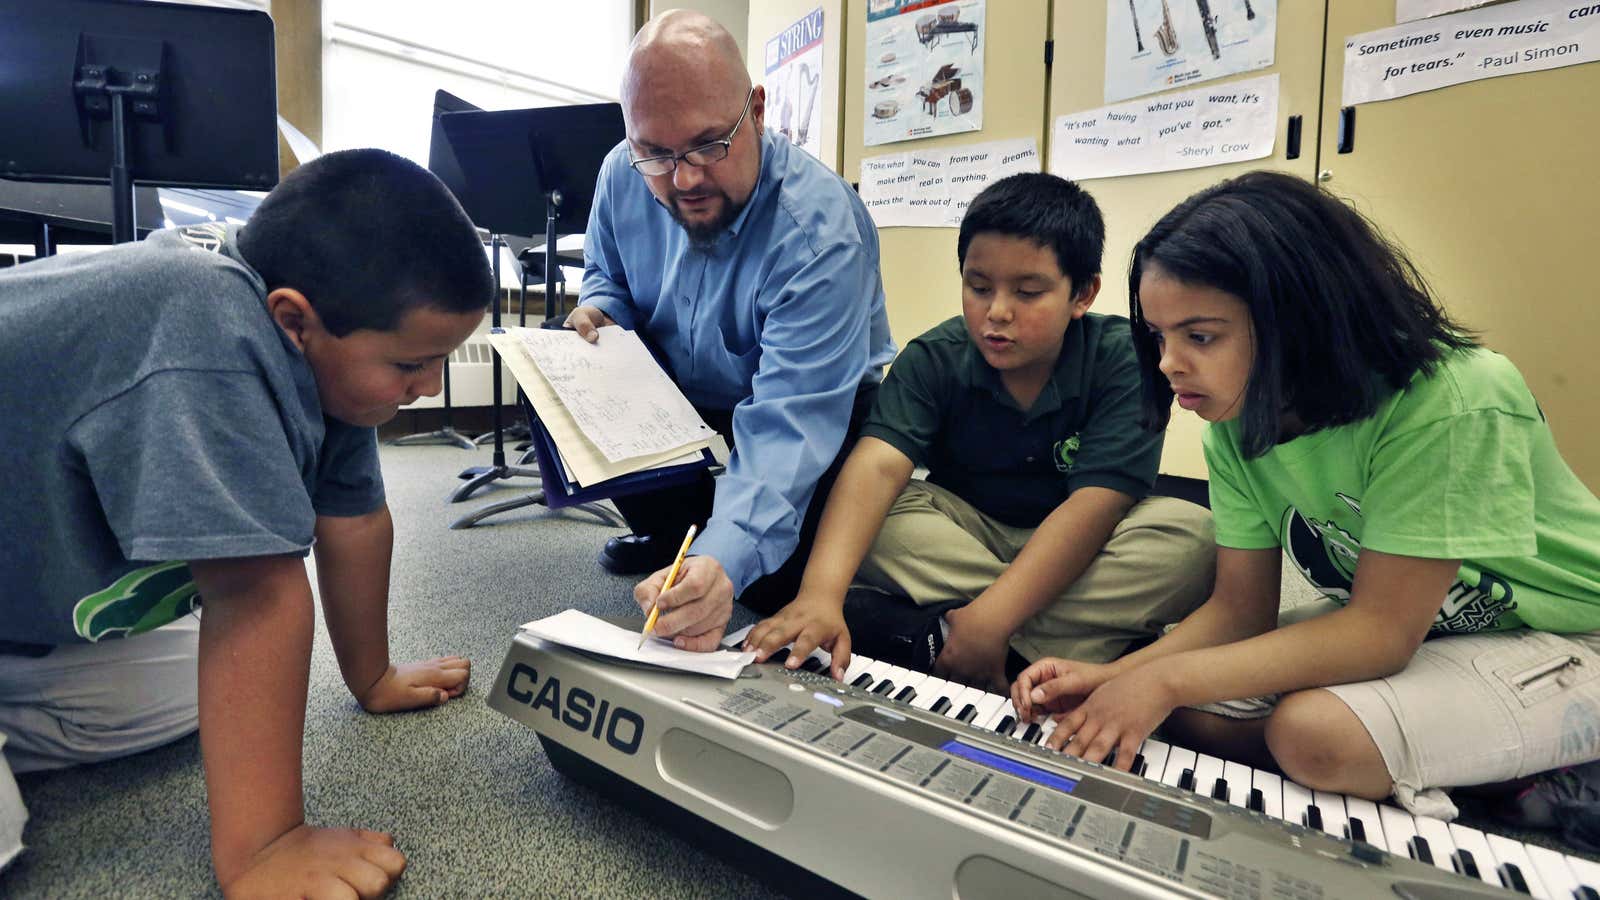 To engage students, teachers should teach them modern music methods.